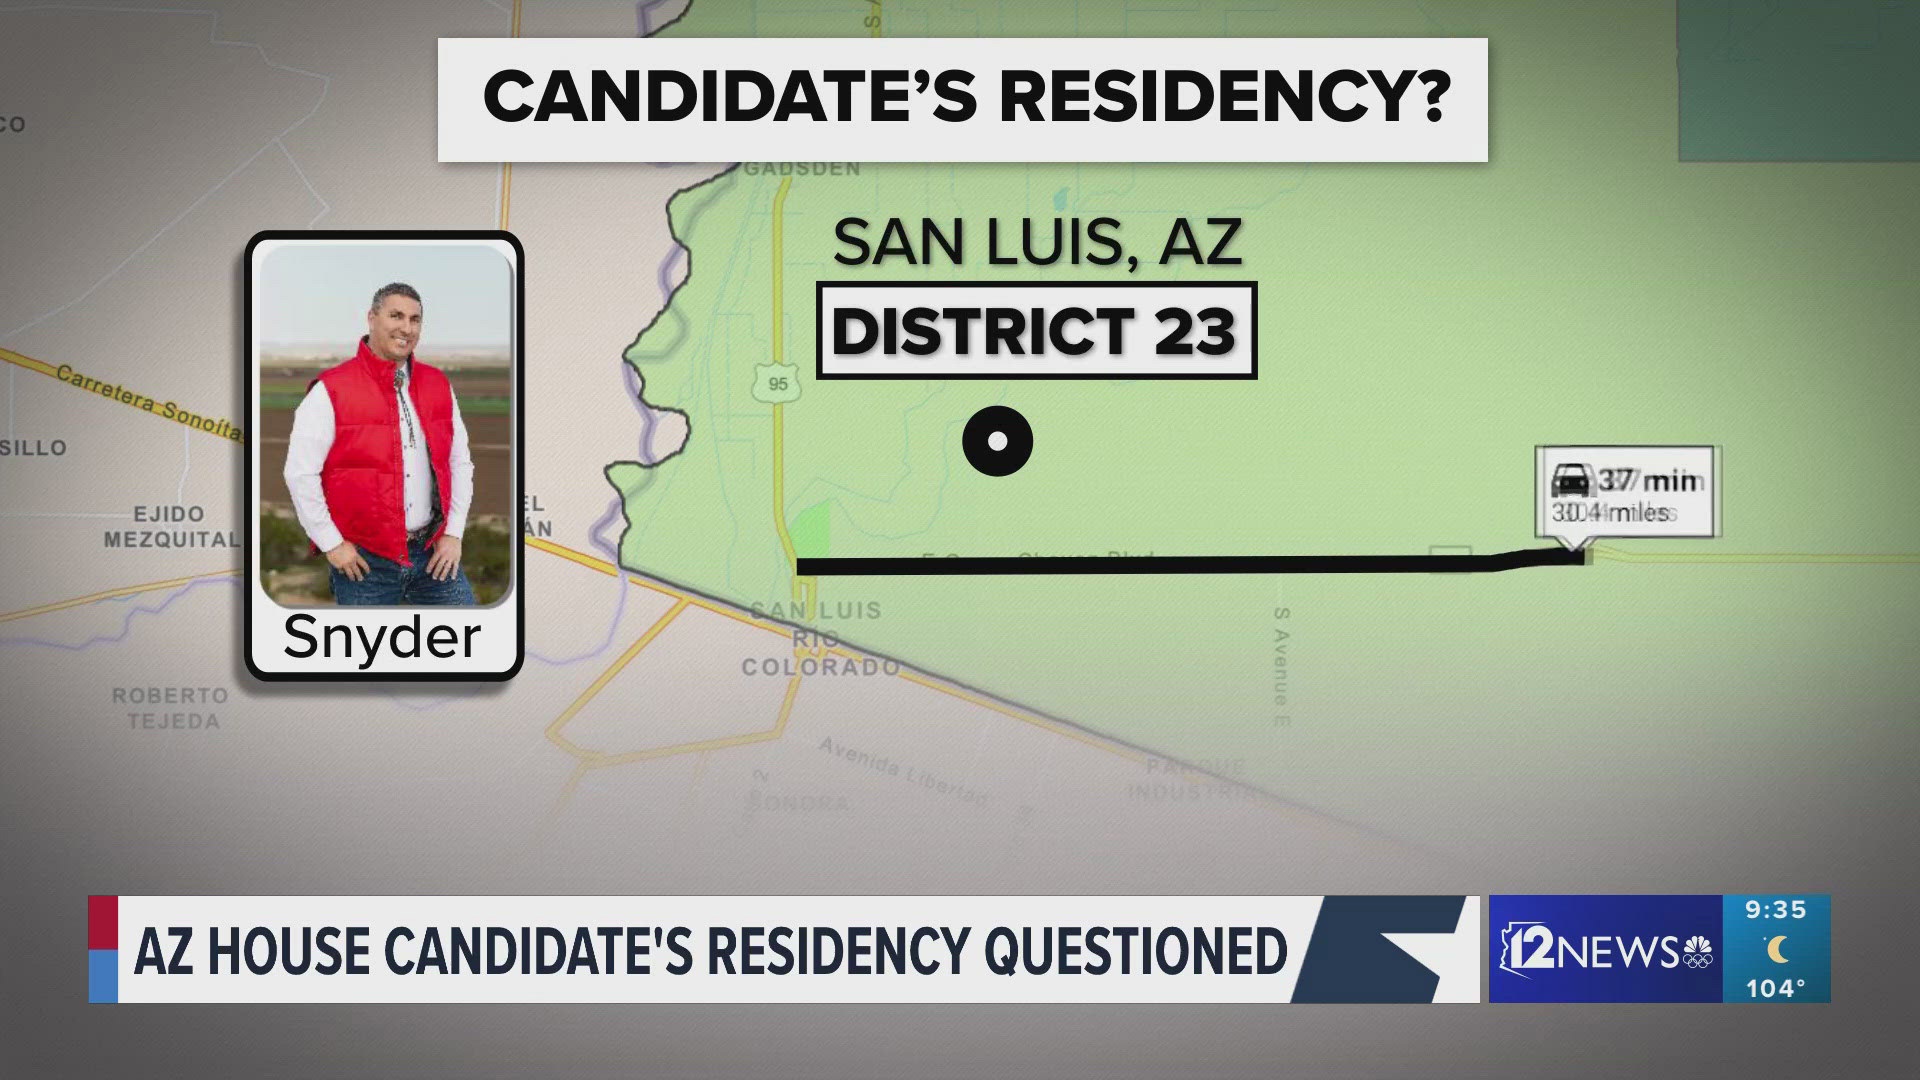 Voters are questioning where Gary Garcia Snyder lives.